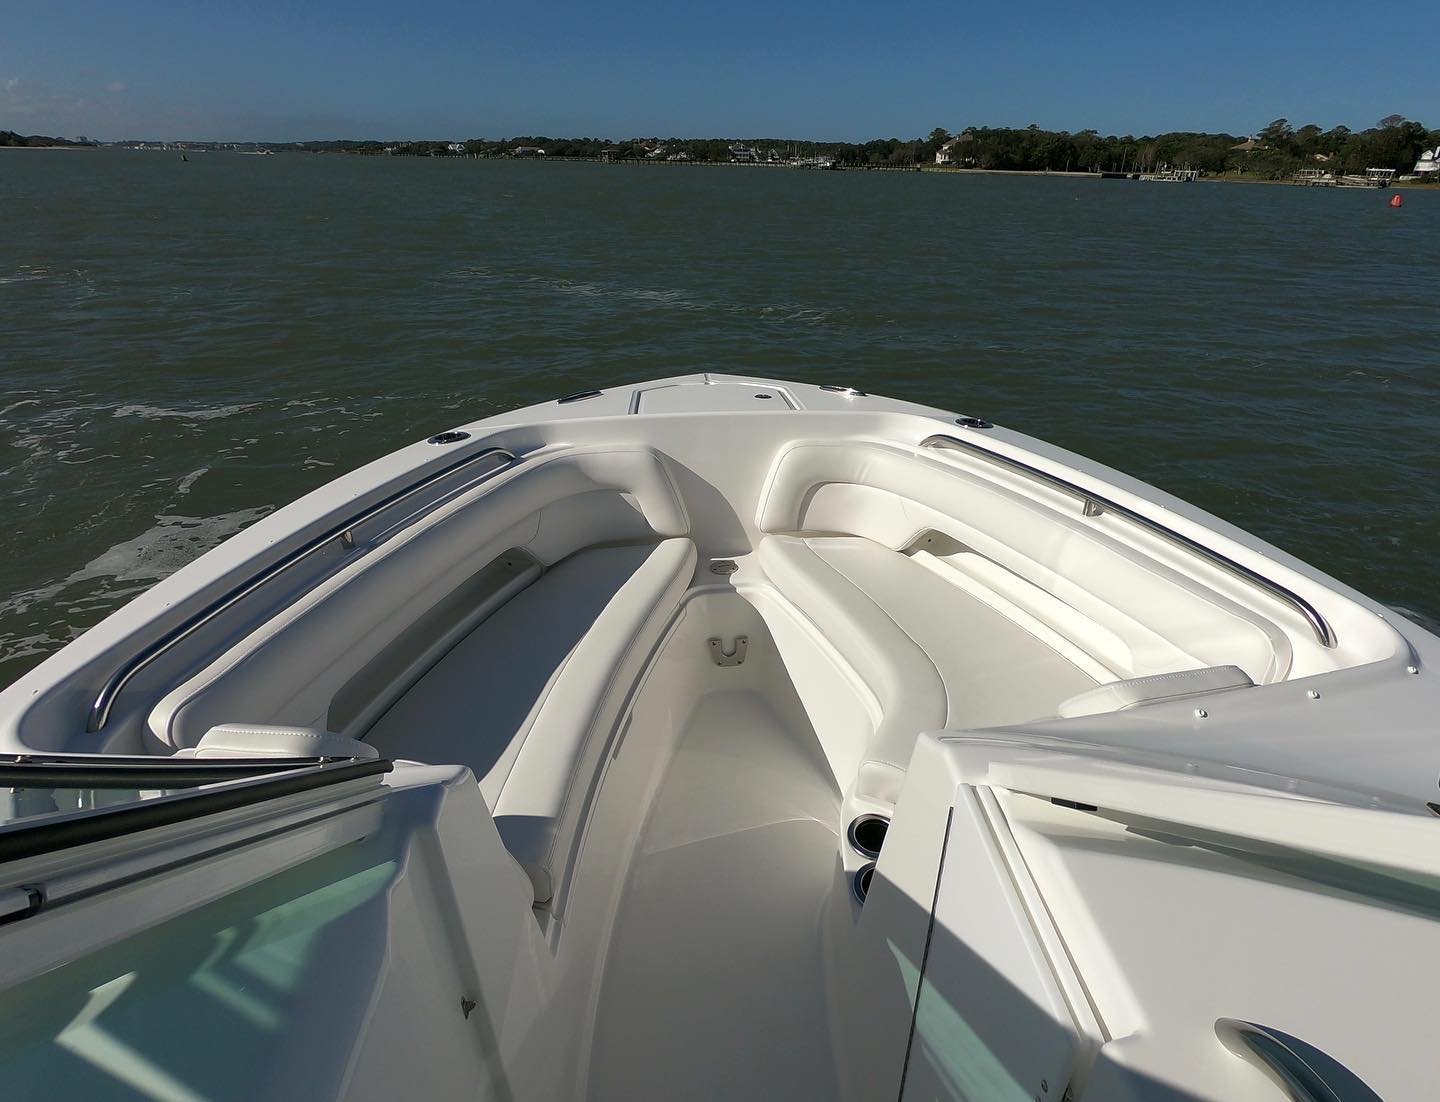 Look at that bow! The new boat has comfy bow seating, open air, and Carolina flair. Who&rsquo;s ready for summer?